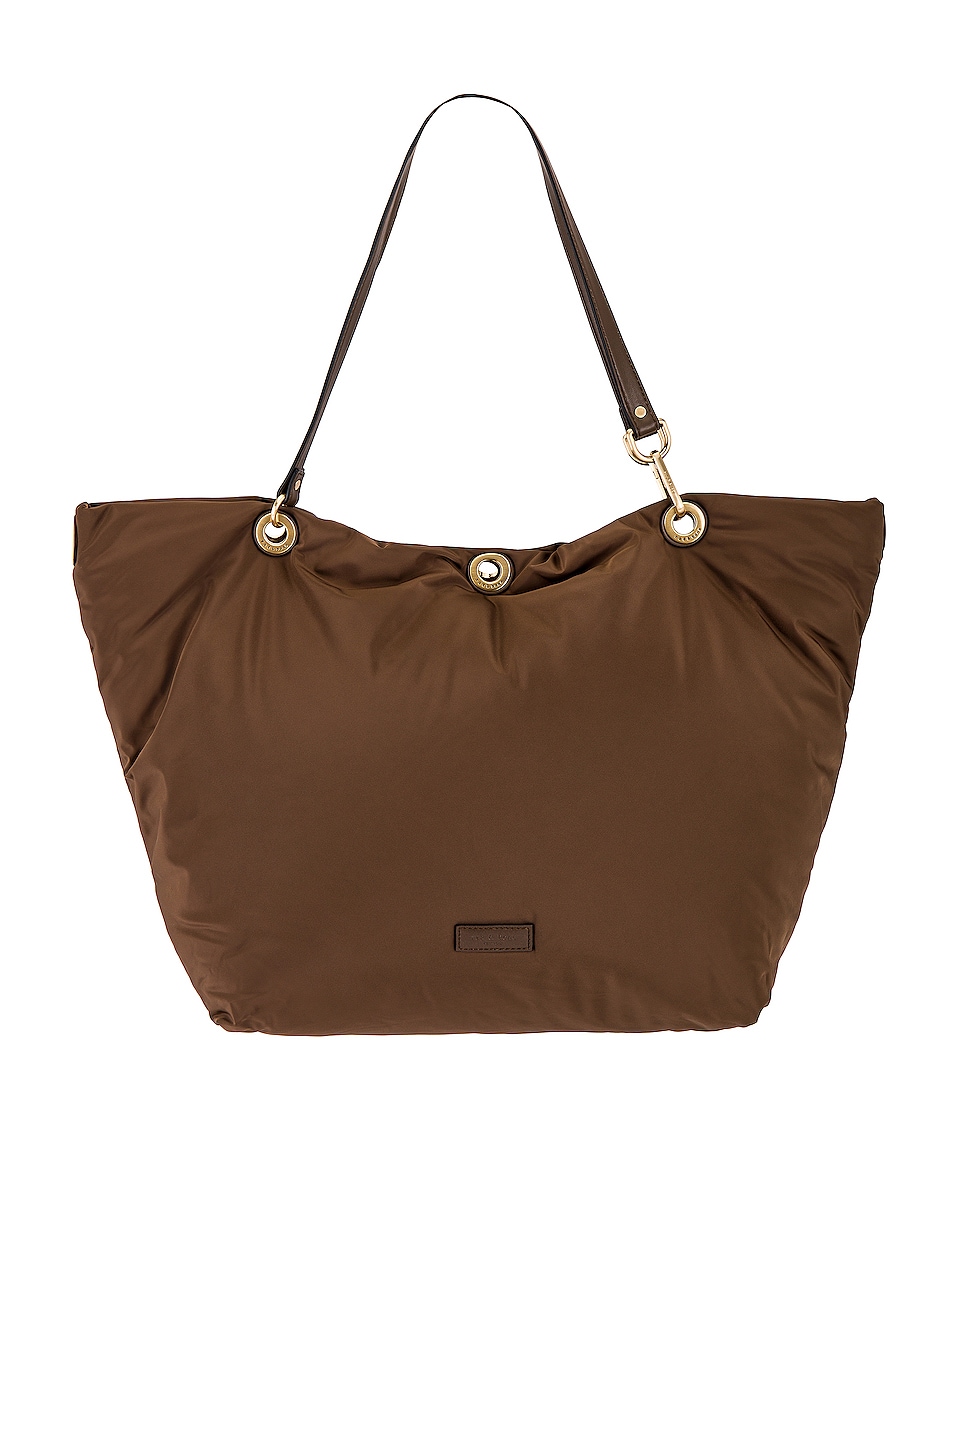 Revival Tote in Tundra Brown 